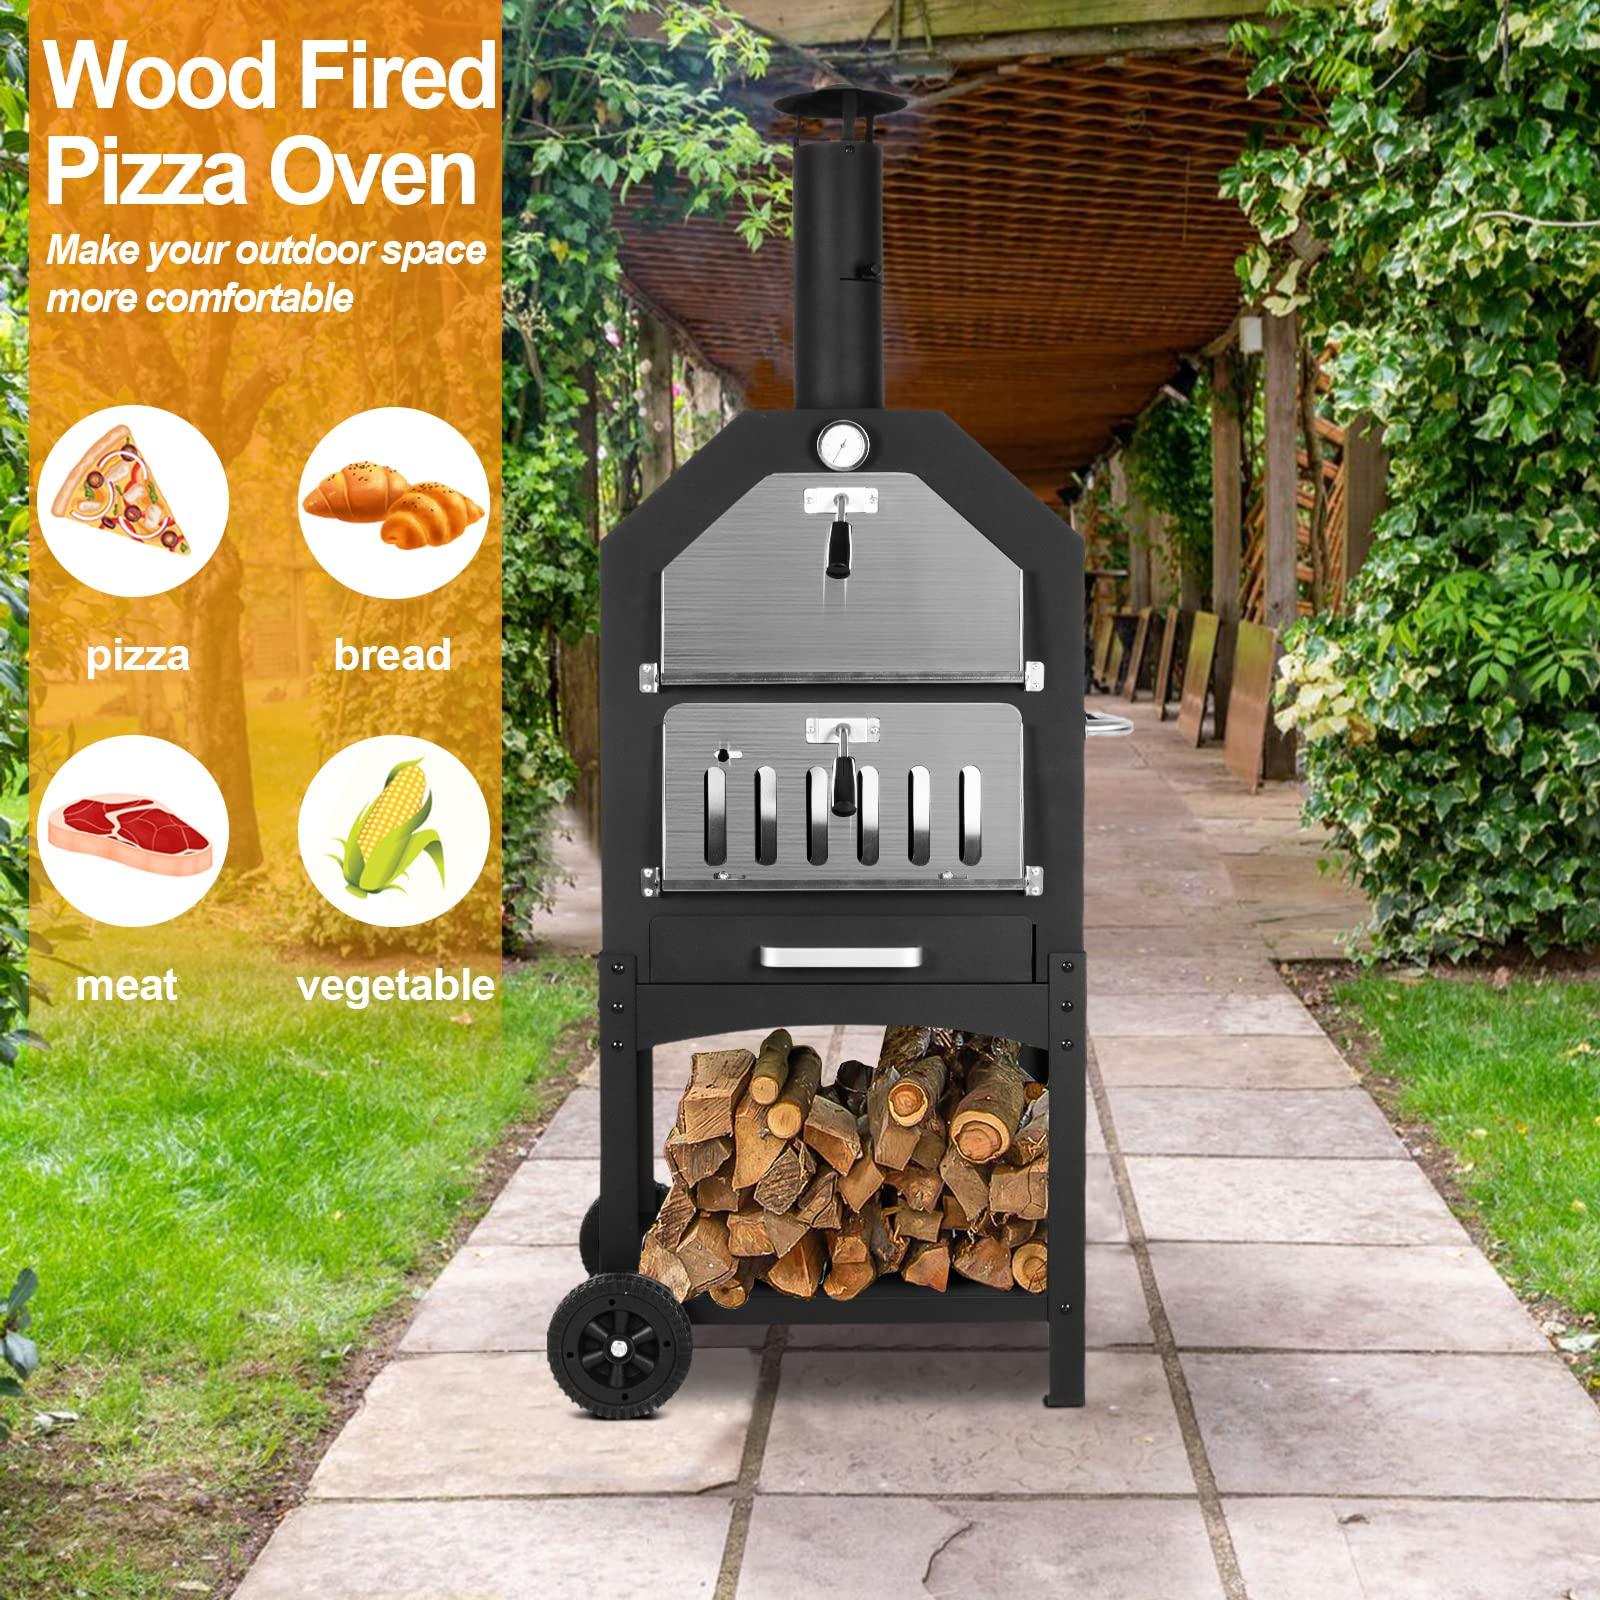 Outdoor Pizza Oven Wood Fired Pizza Oven Patio Portable Pizza Maker Cooking Grill with Wheels Waterproof Cover for Backyard Camping - CookCave